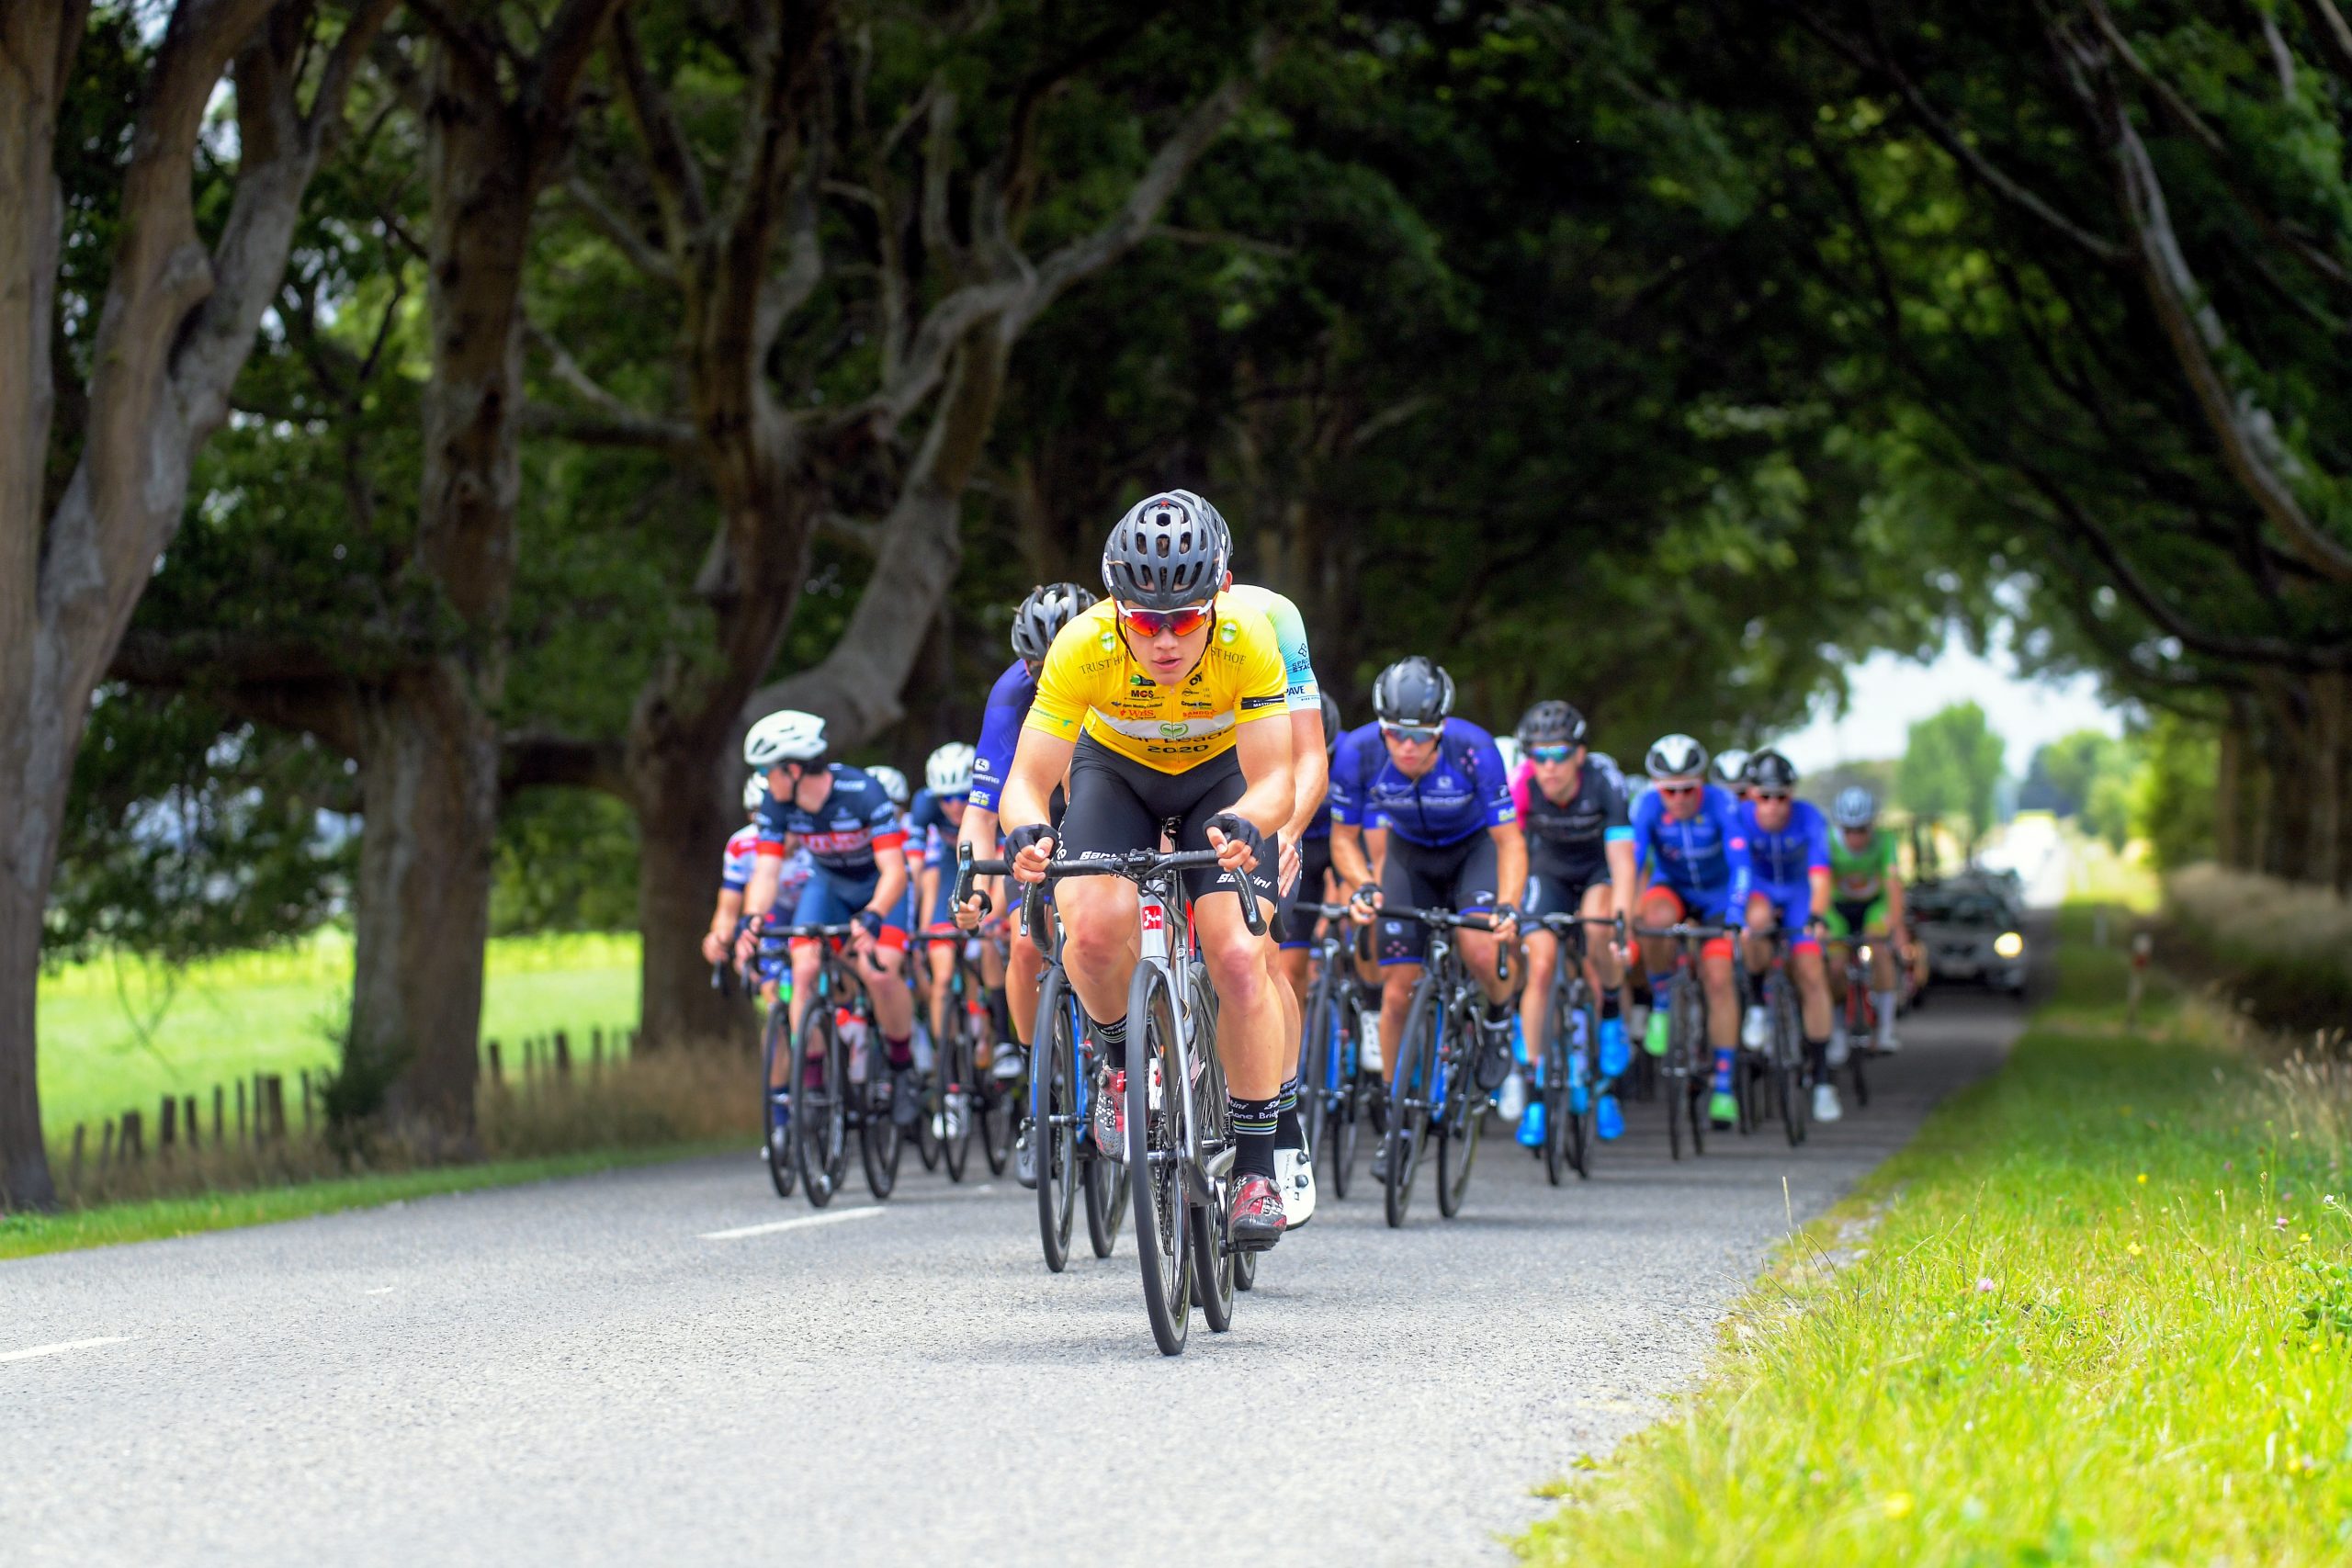 Jensen Plowright (Australia/Team BridgeLane) leads the peloton during stage four of the NZ Cycle Classic UCI Oceania Tour (Te Wharau-Admiral Hill Queen Stage) in Wairarapa, New Zealand on Saturday, 18 January 2020. Photo: Dave Lintott / lintottphoto.co.nz